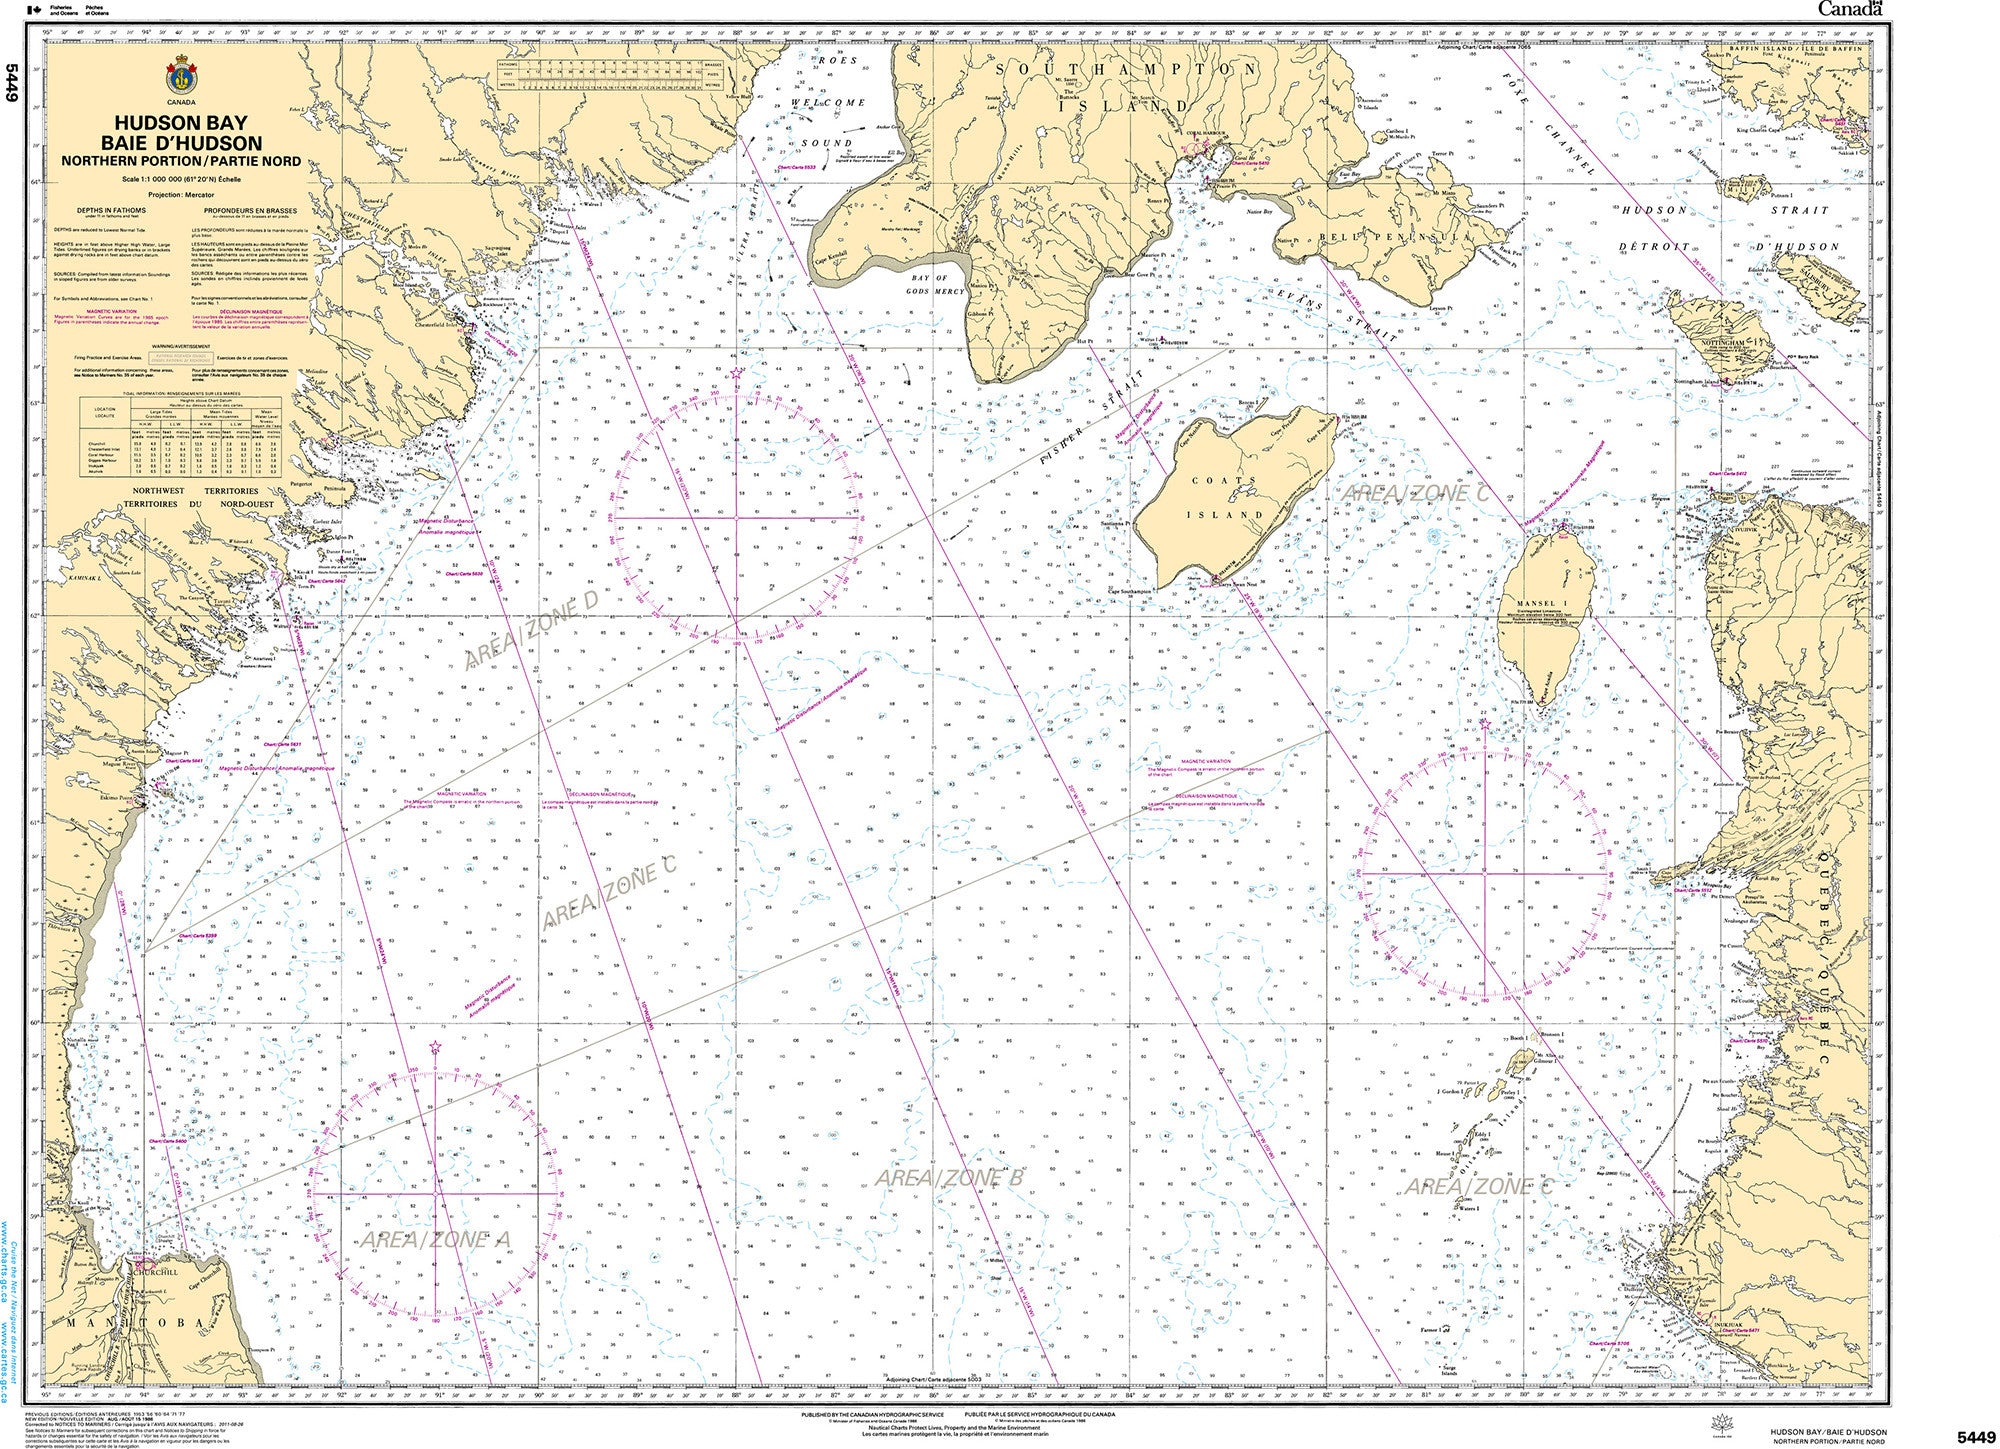 Canadian Hydrographic Service Nautical Chart CHS5449: Hudson Bay Baie d'Hudson, Northern Portion/Partie nord